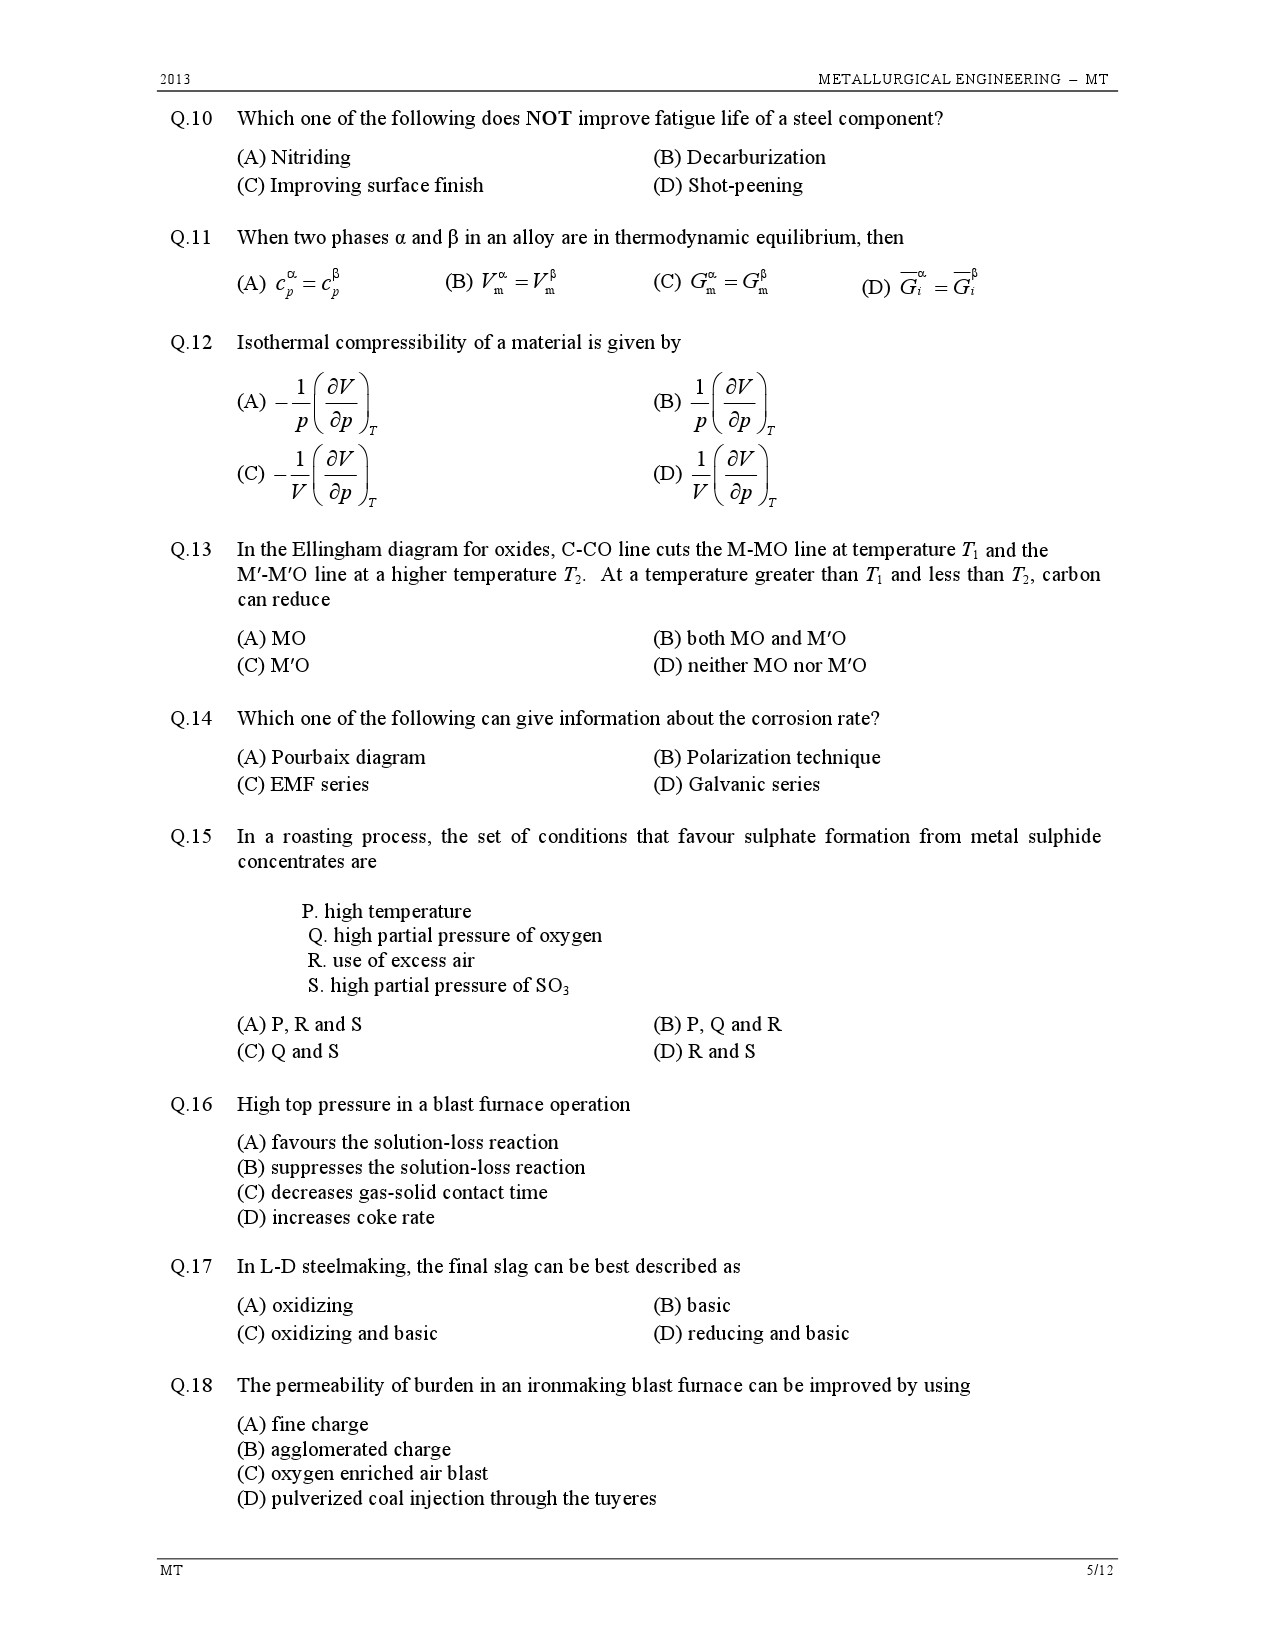 GATE Exam Question Paper 2013 Metallurgical Engineering 5